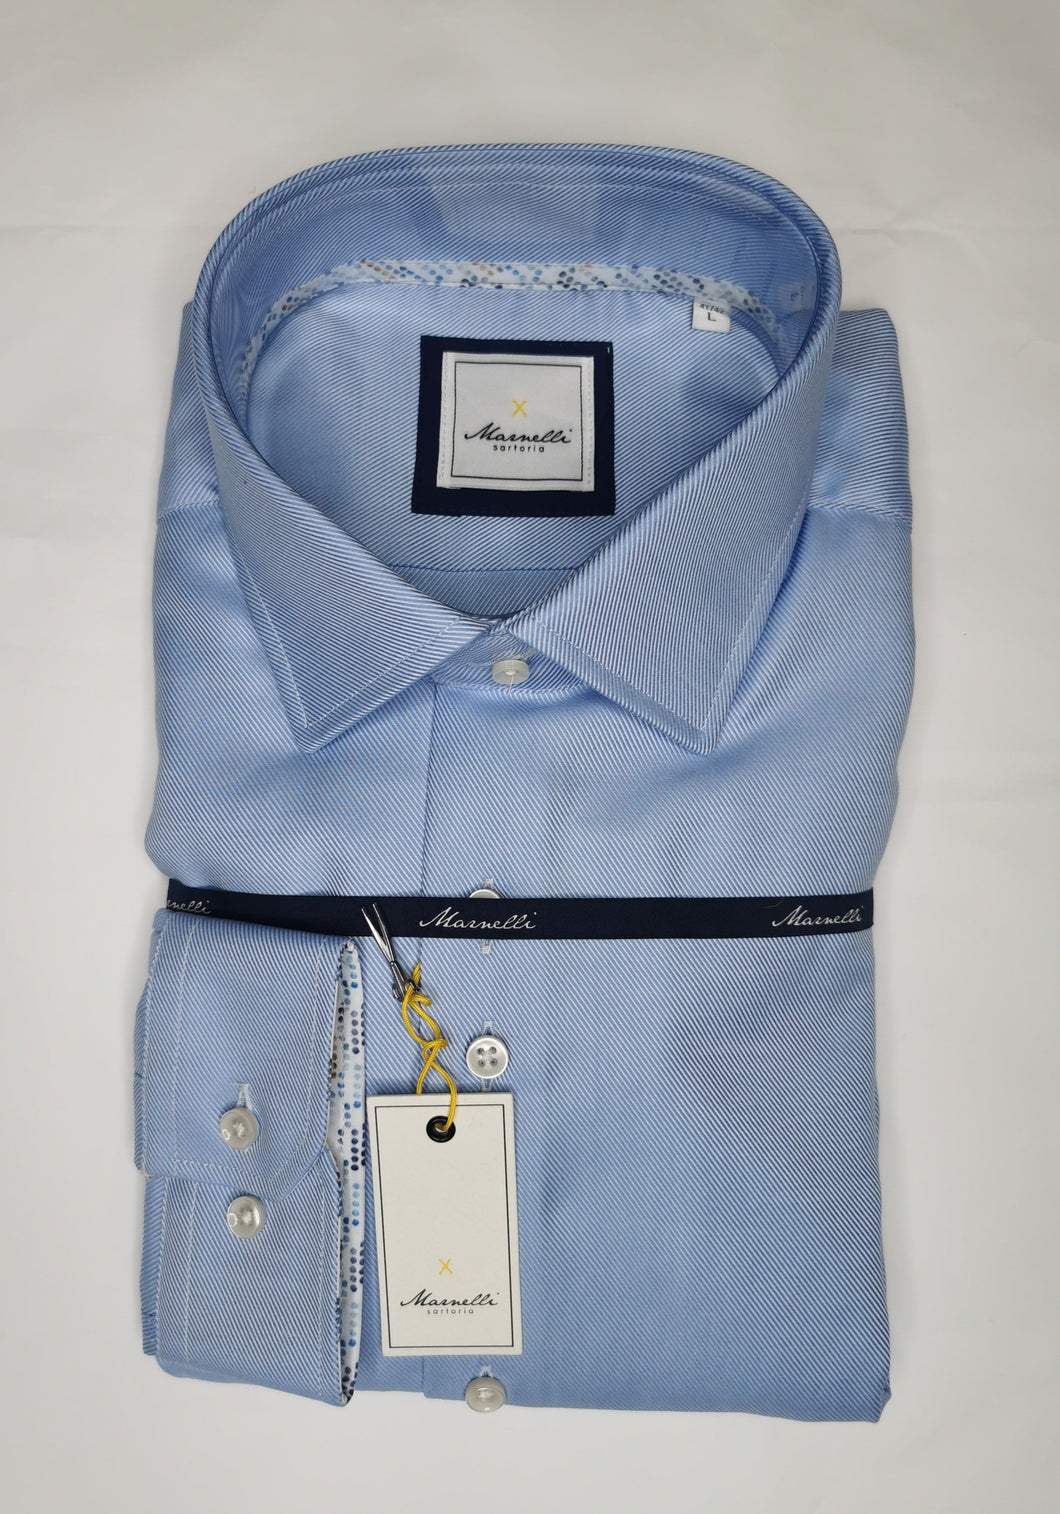 Marnelli - Blue Two Ply Twilled Shirt, Contrast Trim (XXL Only)